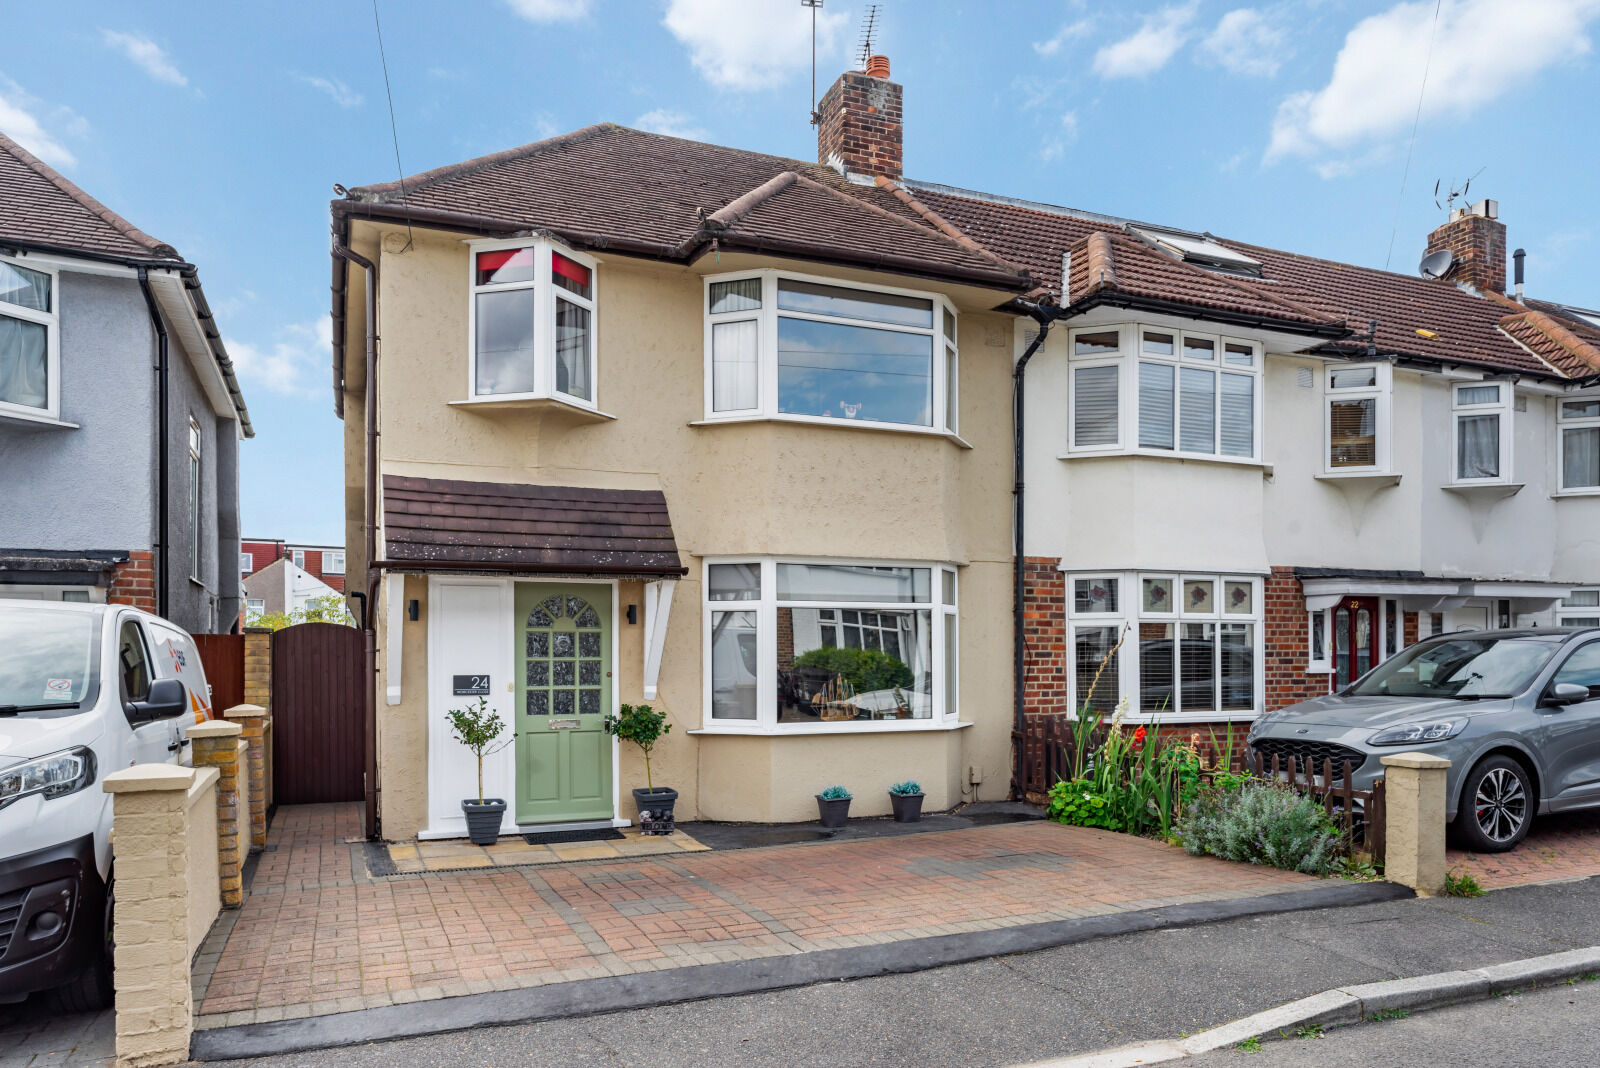 3 bedroom end terraced house for sale Worcester Close, Mitcham, CR4, main image